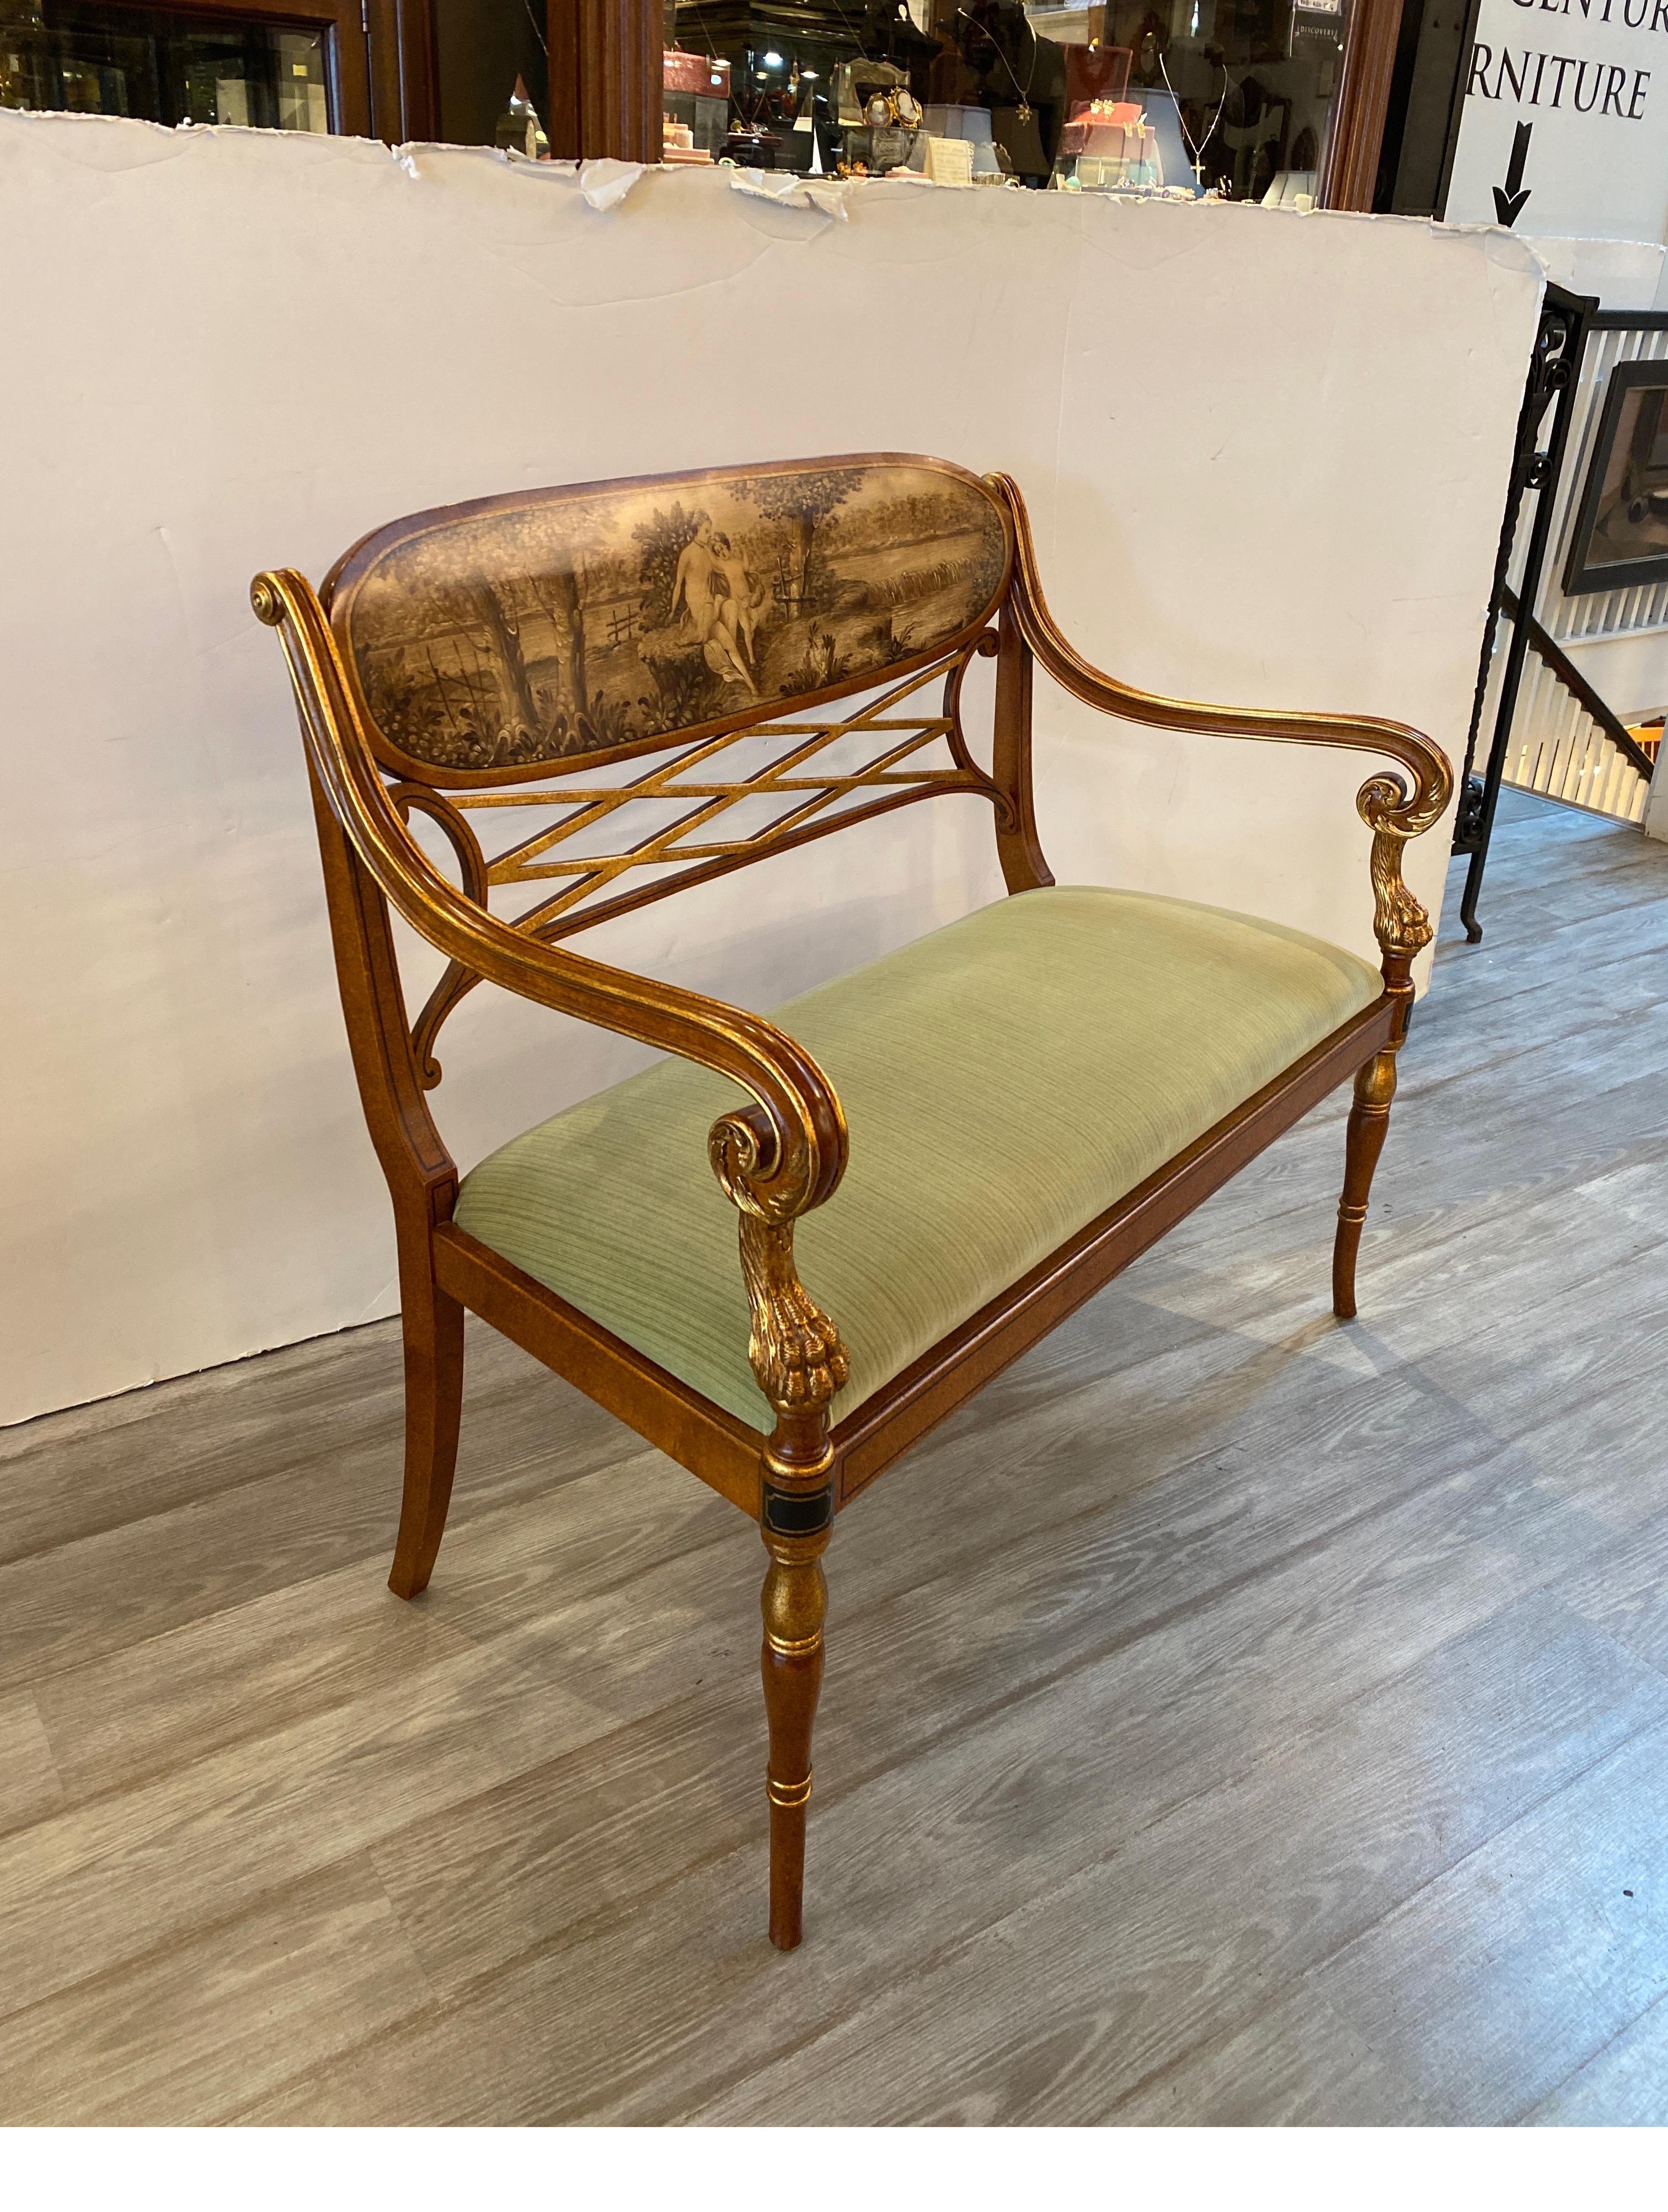 Beautiful hand crafted double seat settee by Galimberti Lino, Italy. The finish is a hand stippled almost tortoise finish on walnut with a cartouche of toile style hand painted scene of mother and child. The seat is a soft high quality light sage